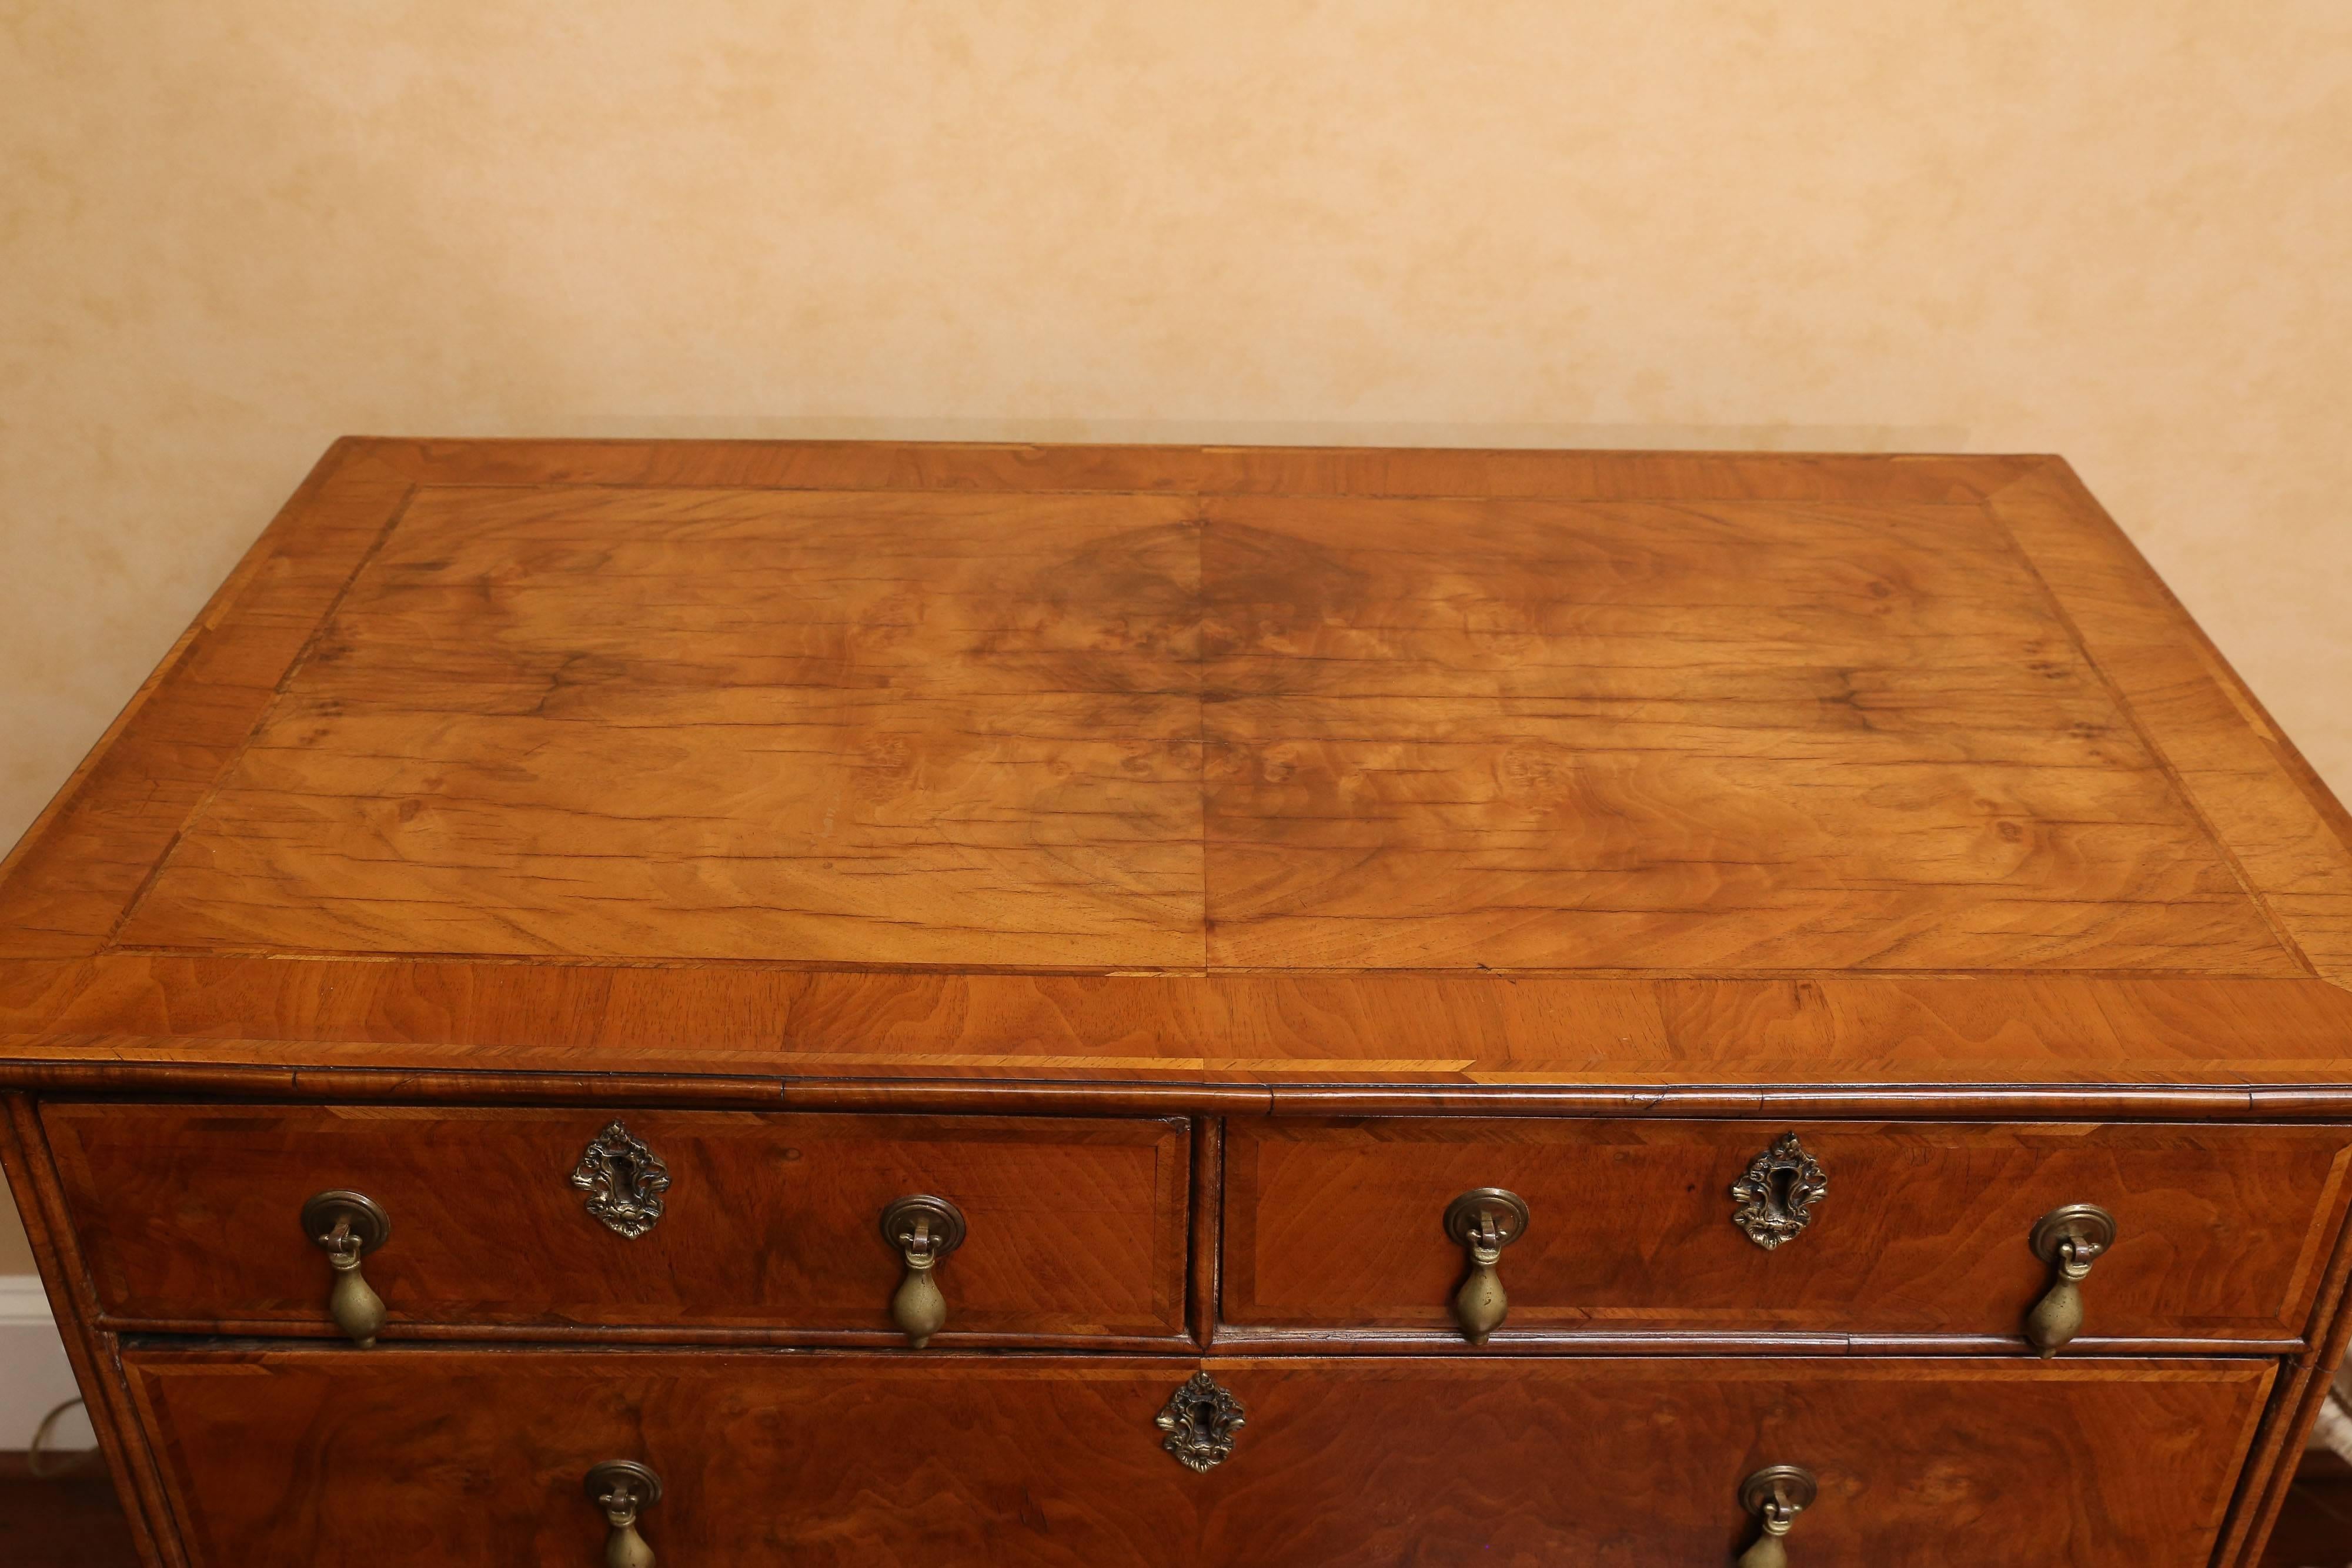 18th century William and Mary walnut chest with two small top drawers and three larger drawers beneath. The chest has burl walnut veneer on its top and the facade of its drawers along with crossbanding details. It sits on bun feet. The inside of the